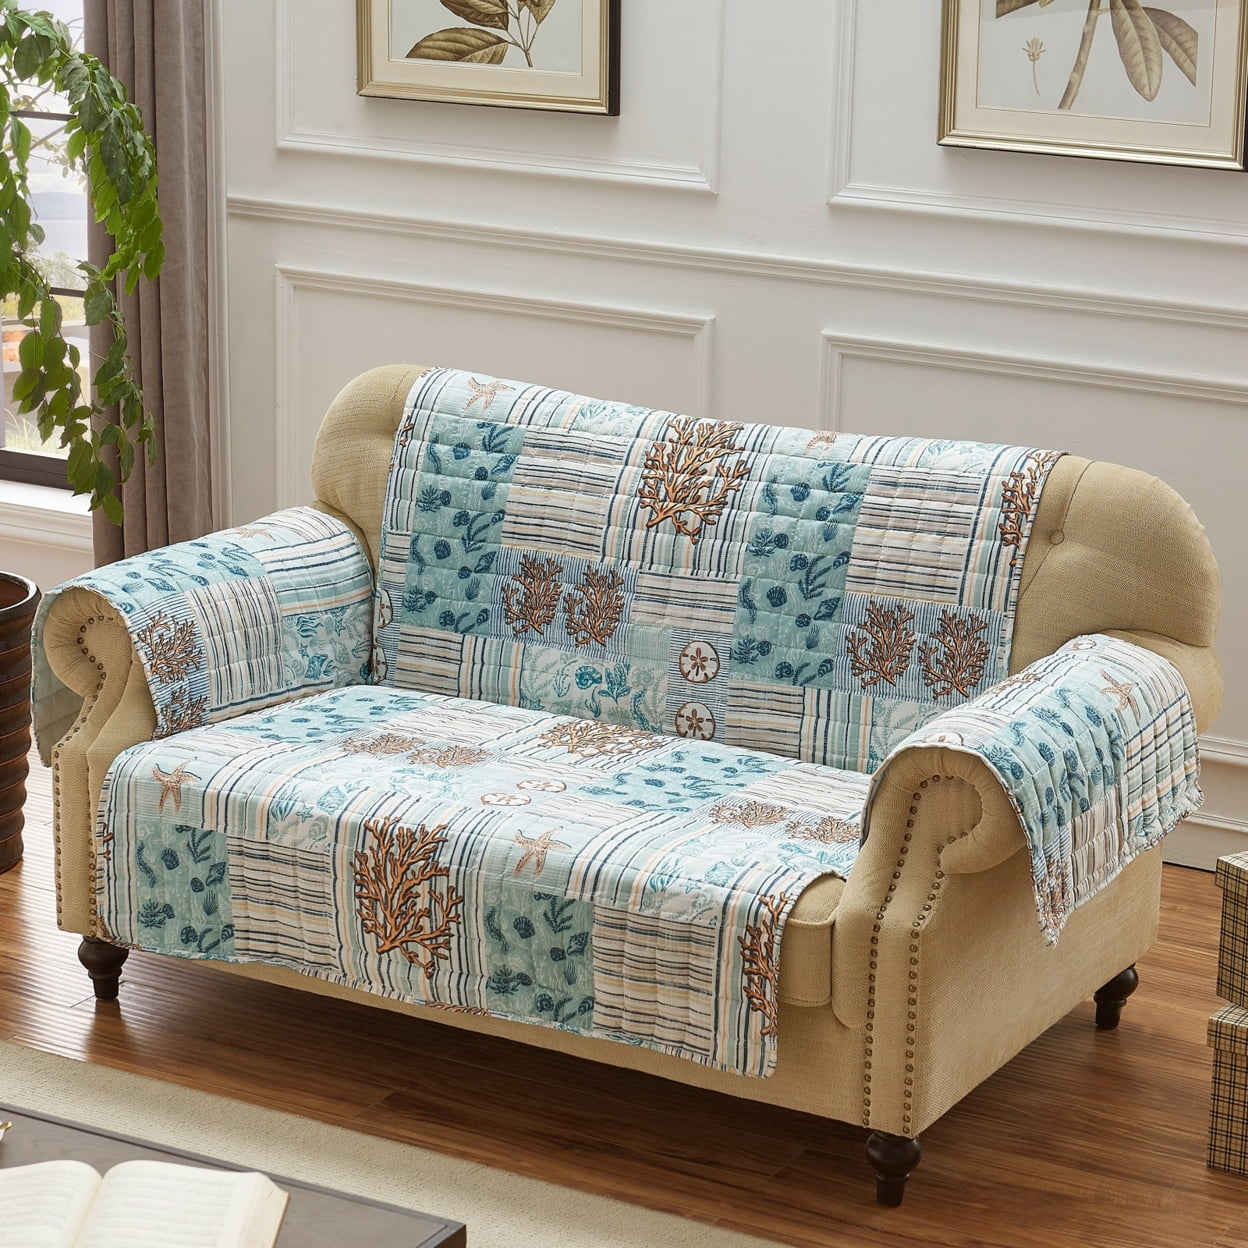 Bm218854 Reversible Sea Life Print Loveseat Protector With Elastic Strap, Blue - 5 X 15 X 12 In.